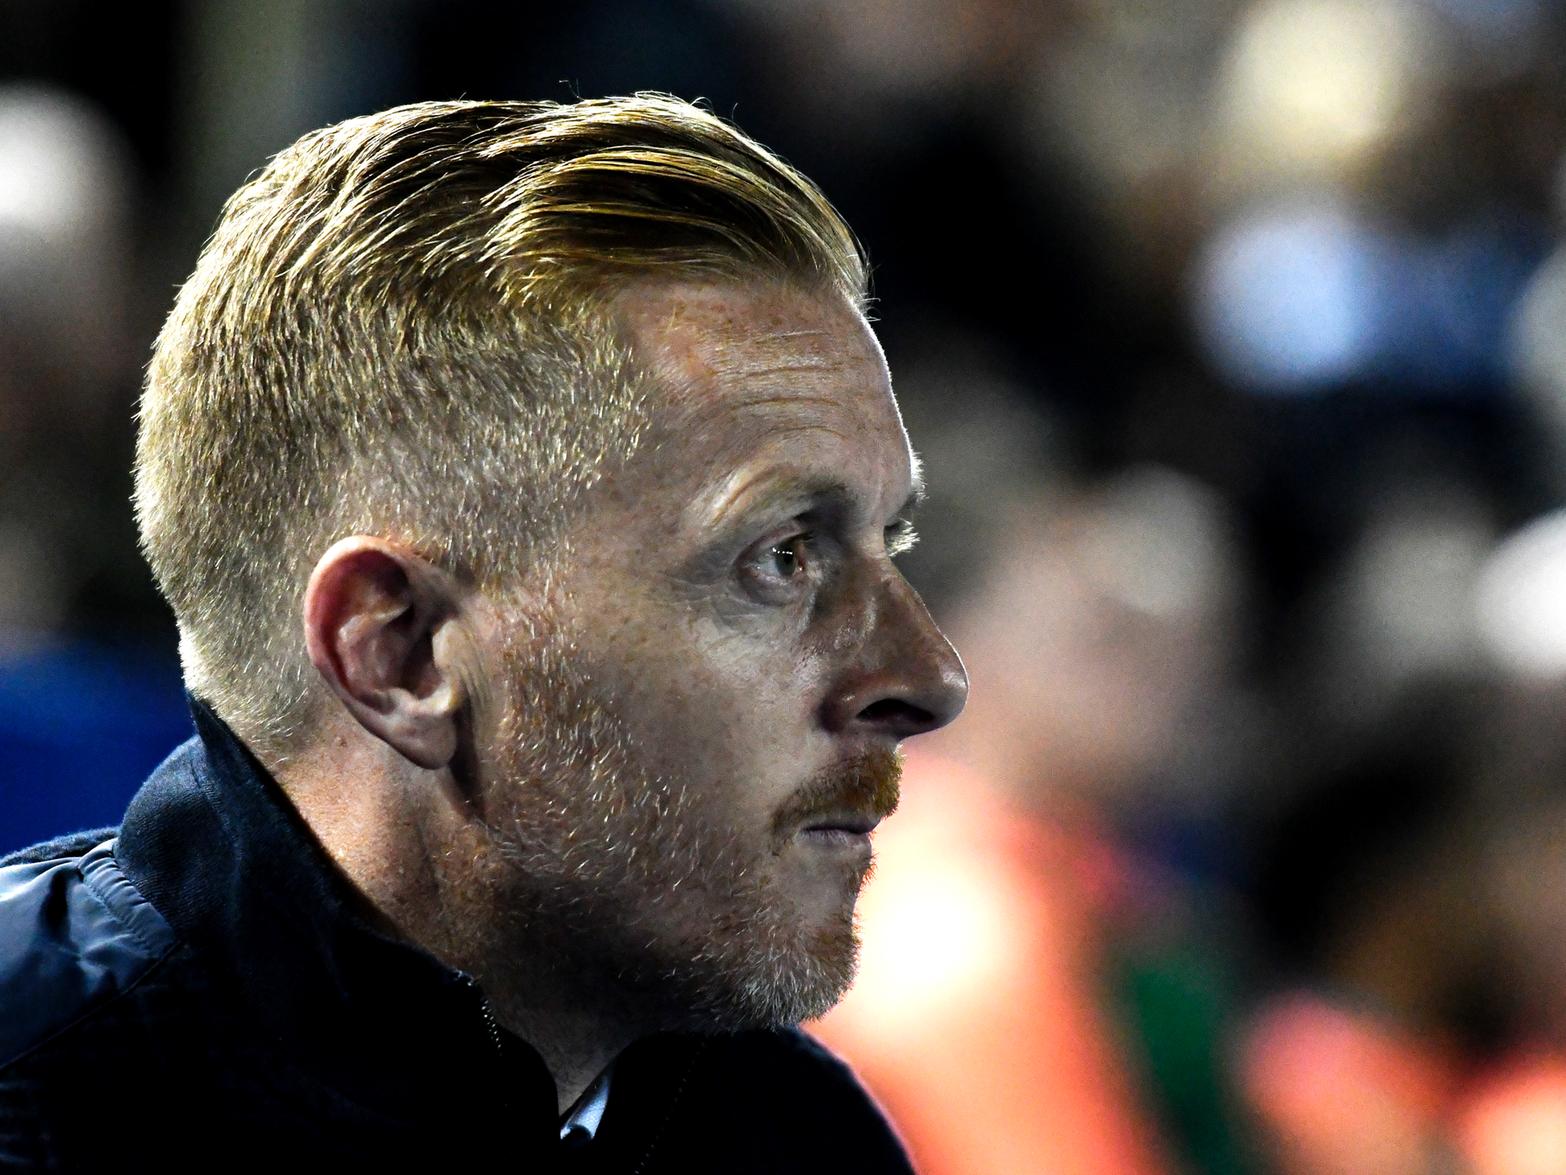 Sheffield Wednesday boss Garry Monk has revealed he's wary of the threat Wigan Athletic pose from set-pieces, and will look to match their physicality at dead ball situations on Saturday. (Sheffield Star)